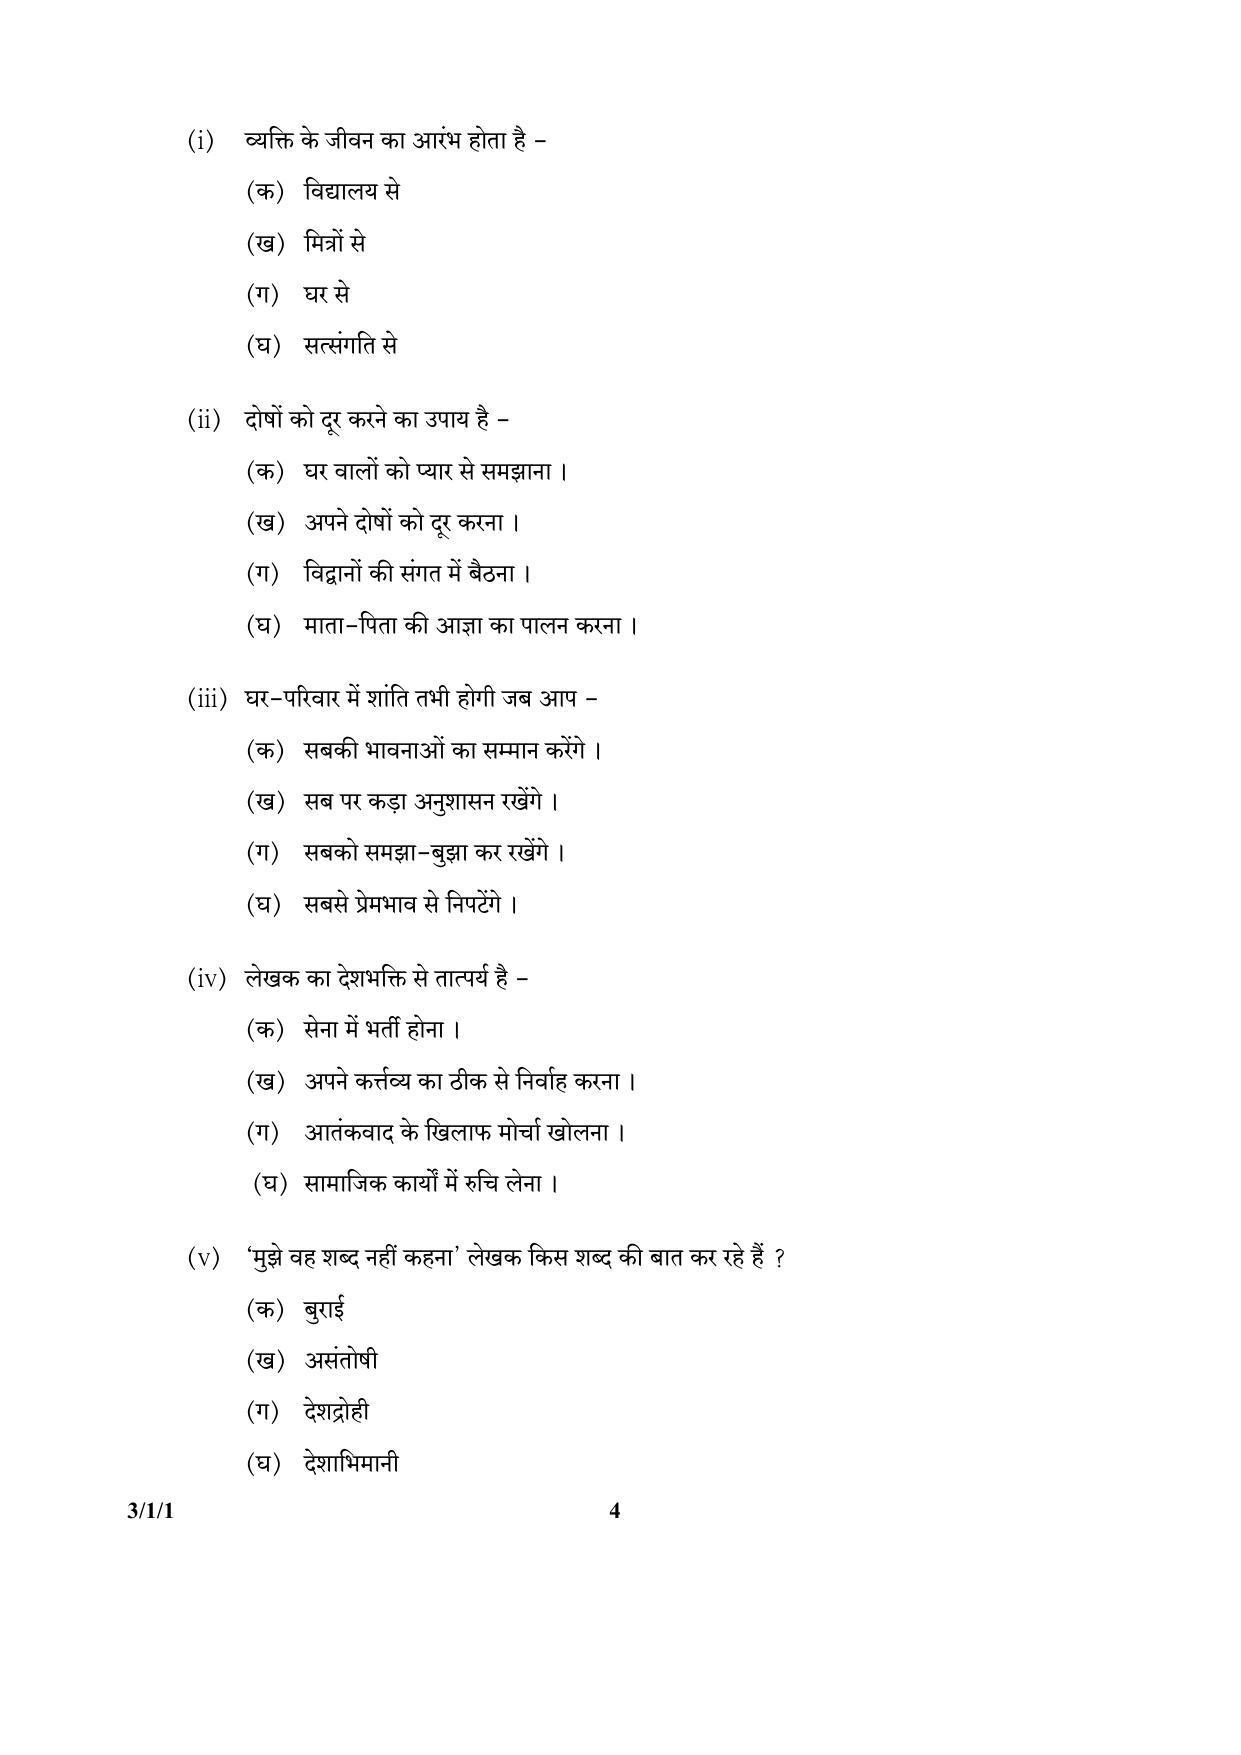 CBSE Class 10 3-1-1 (Hindi) 2017-comptt Question Paper - Page 4